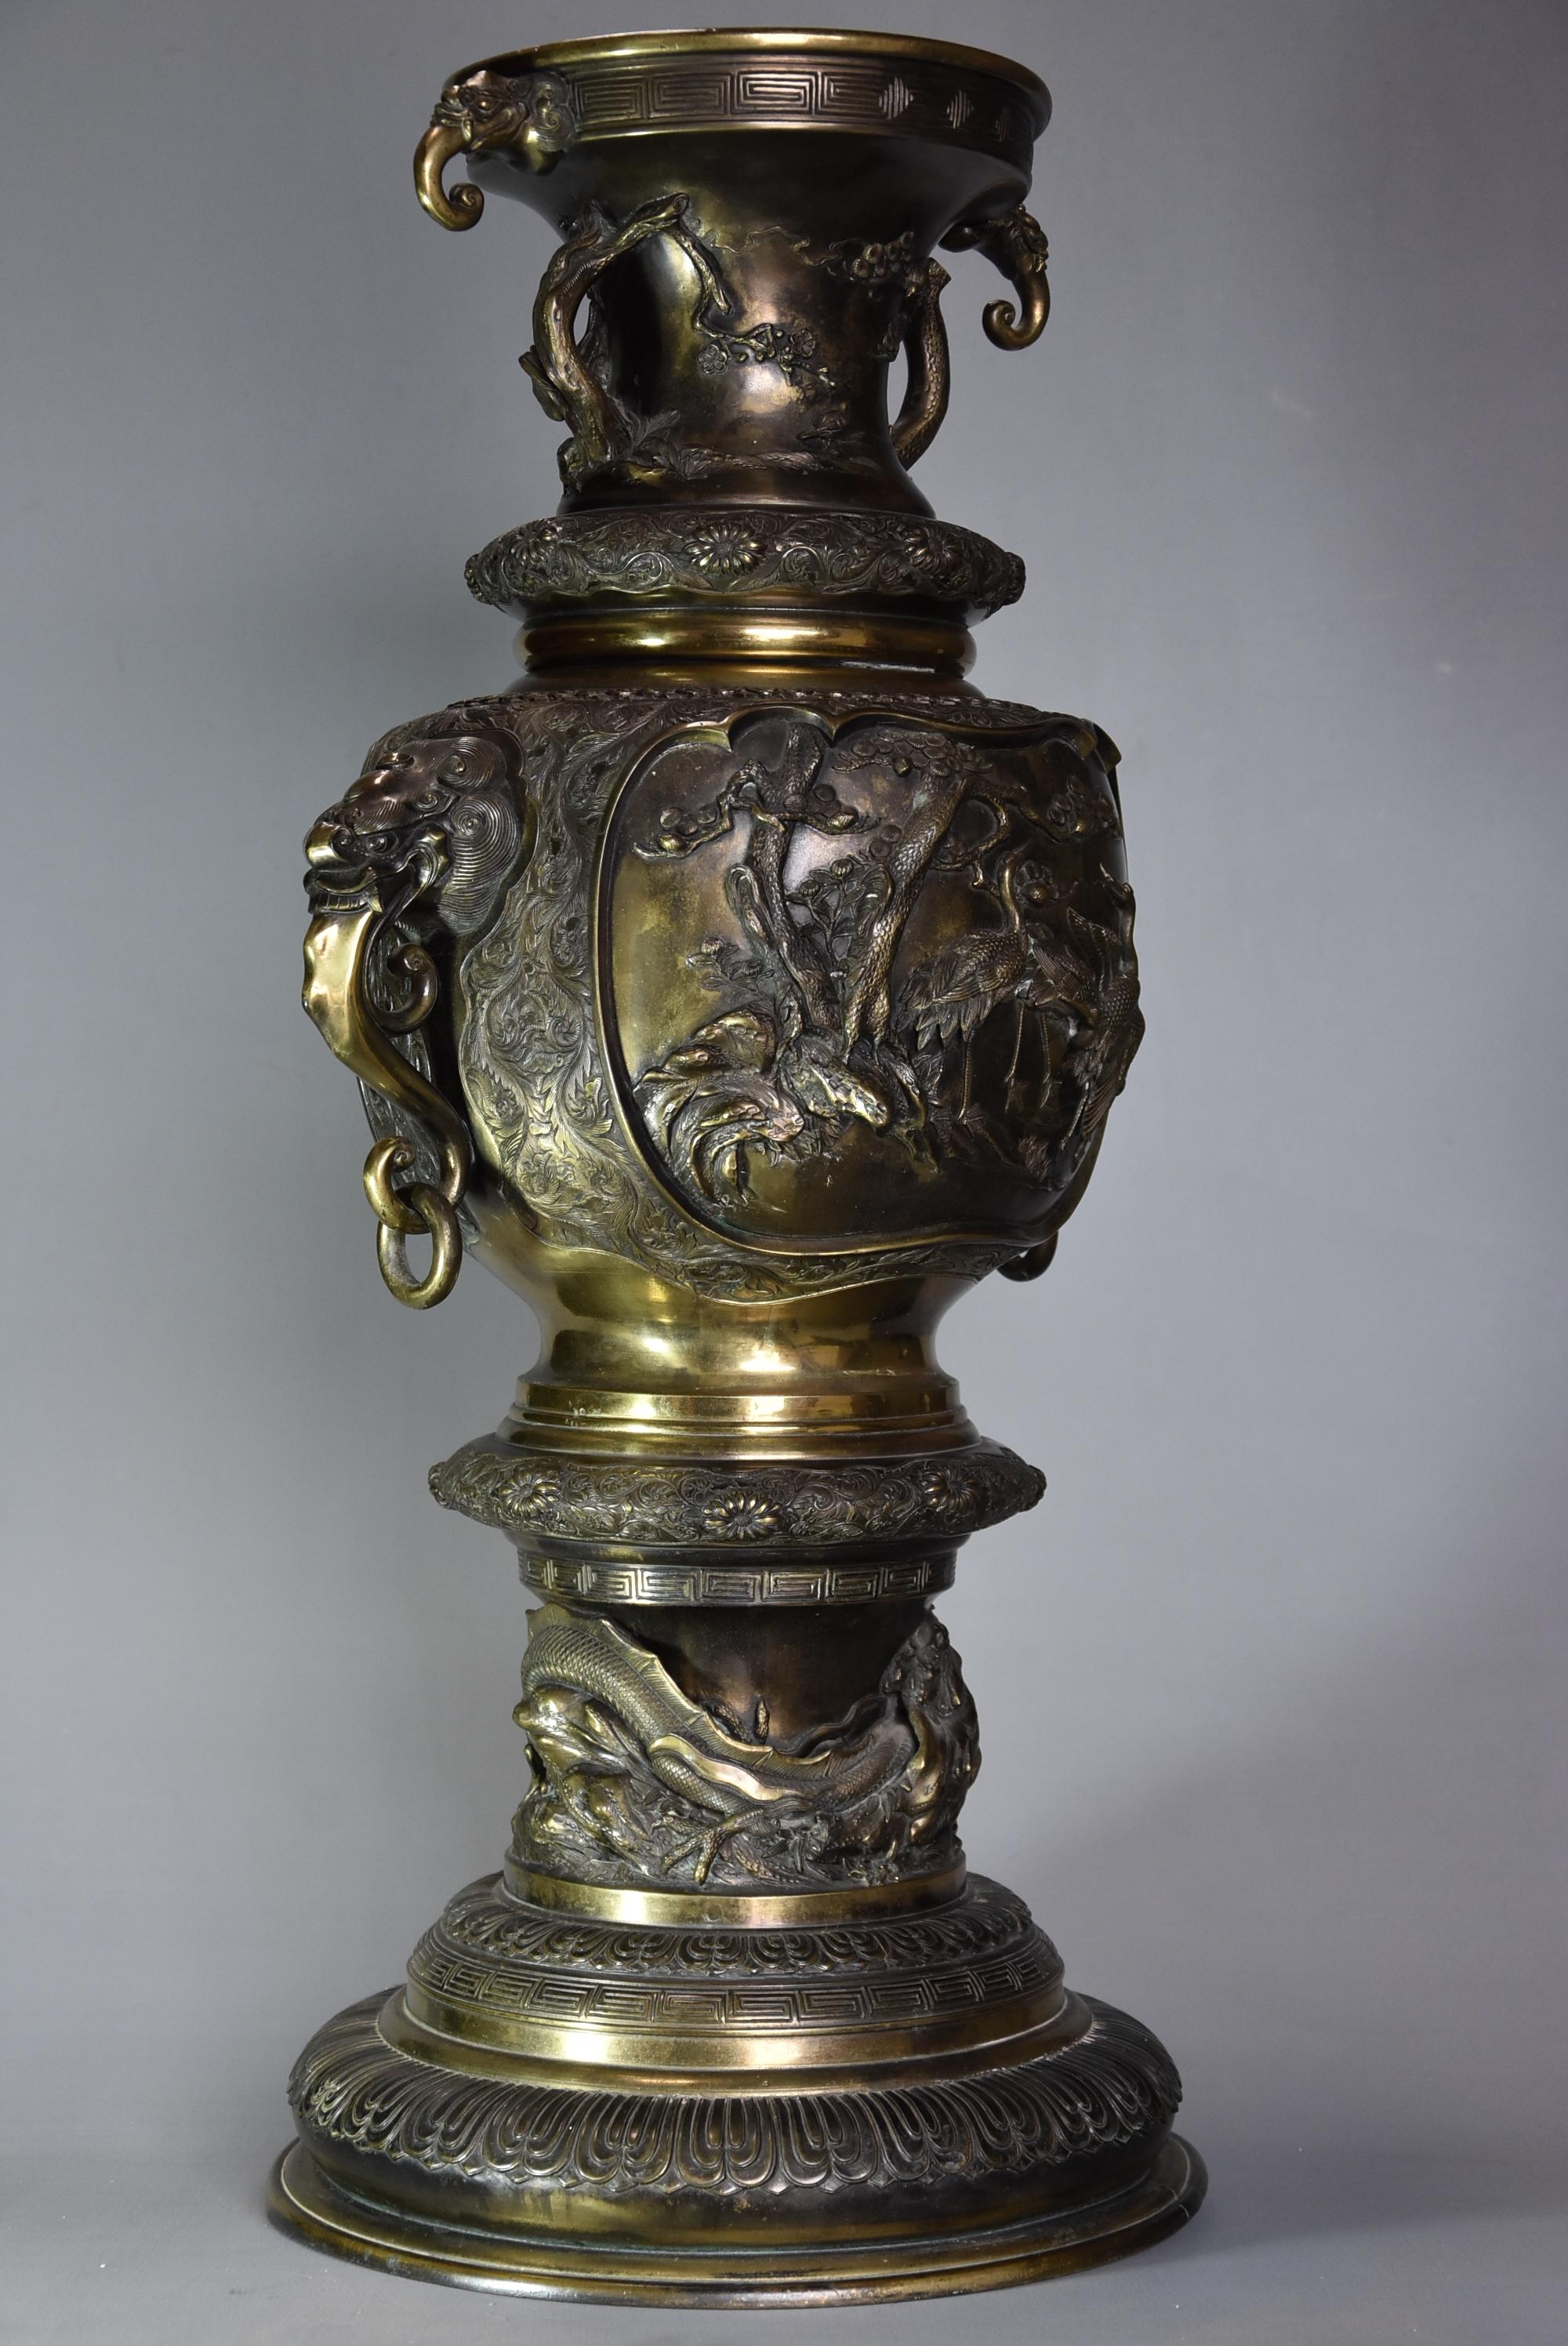 A large late 19th century Japanese Meiji period bronze vase of fine quality.

This bronze vase consists of a flared rim with geometric decoration to the edge with elephant head decoration.

This leads down to fine relief landscape scenes of